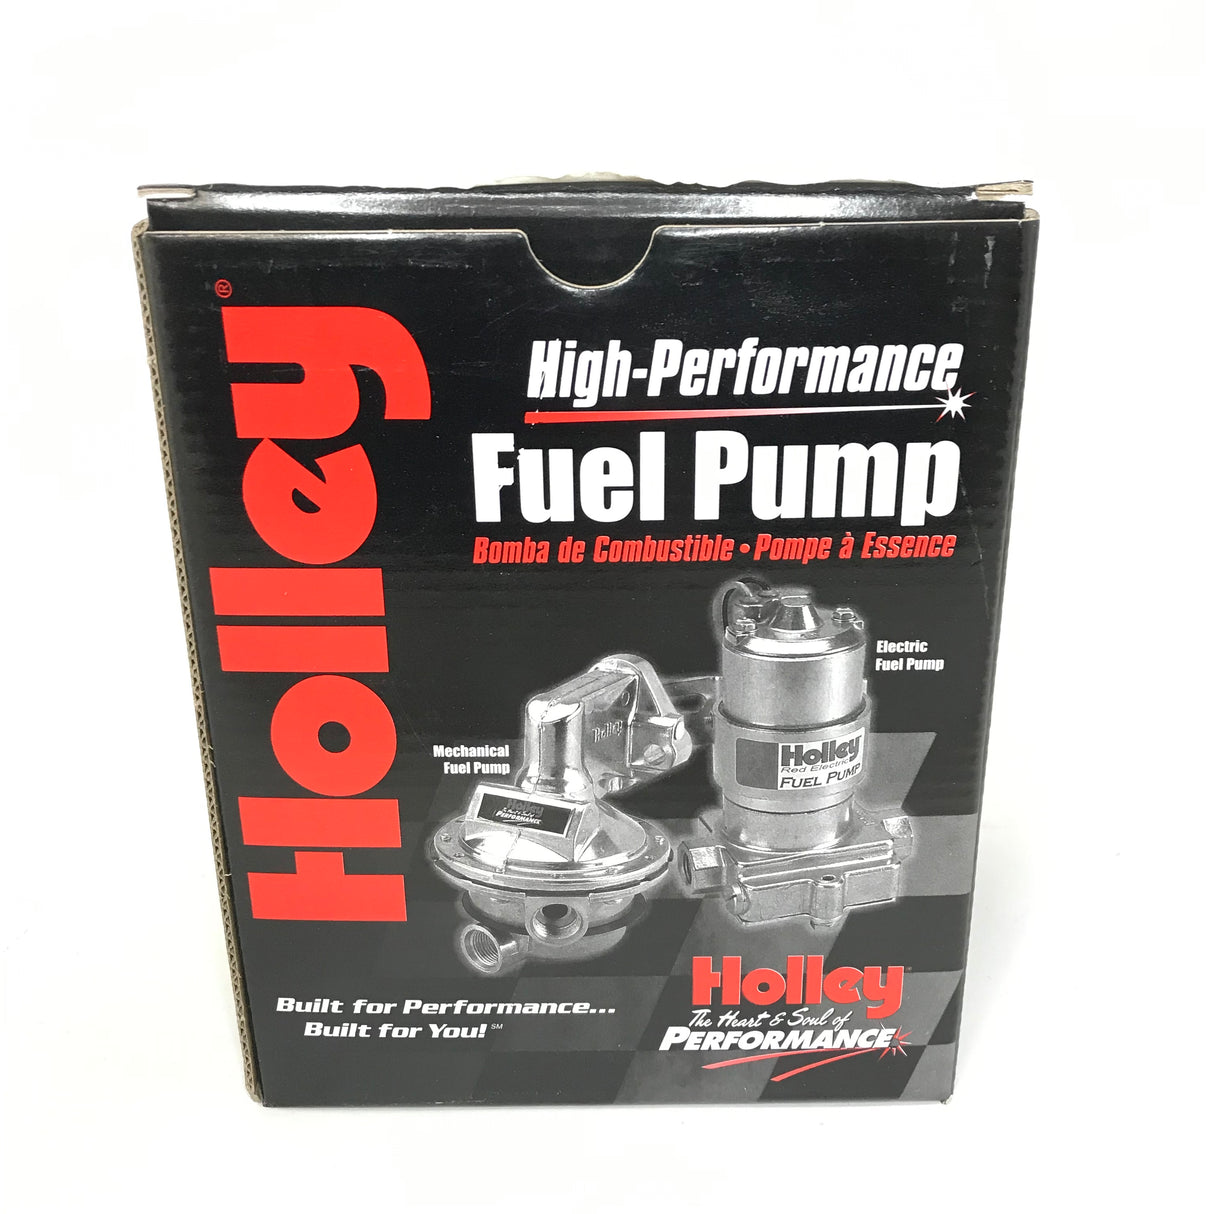 Holley 12-834 80 GPH Mechanical Fuel Pump - Street Performance Carbureted Applications Fits Small Block Chevy V8s Compatible with Gasoline